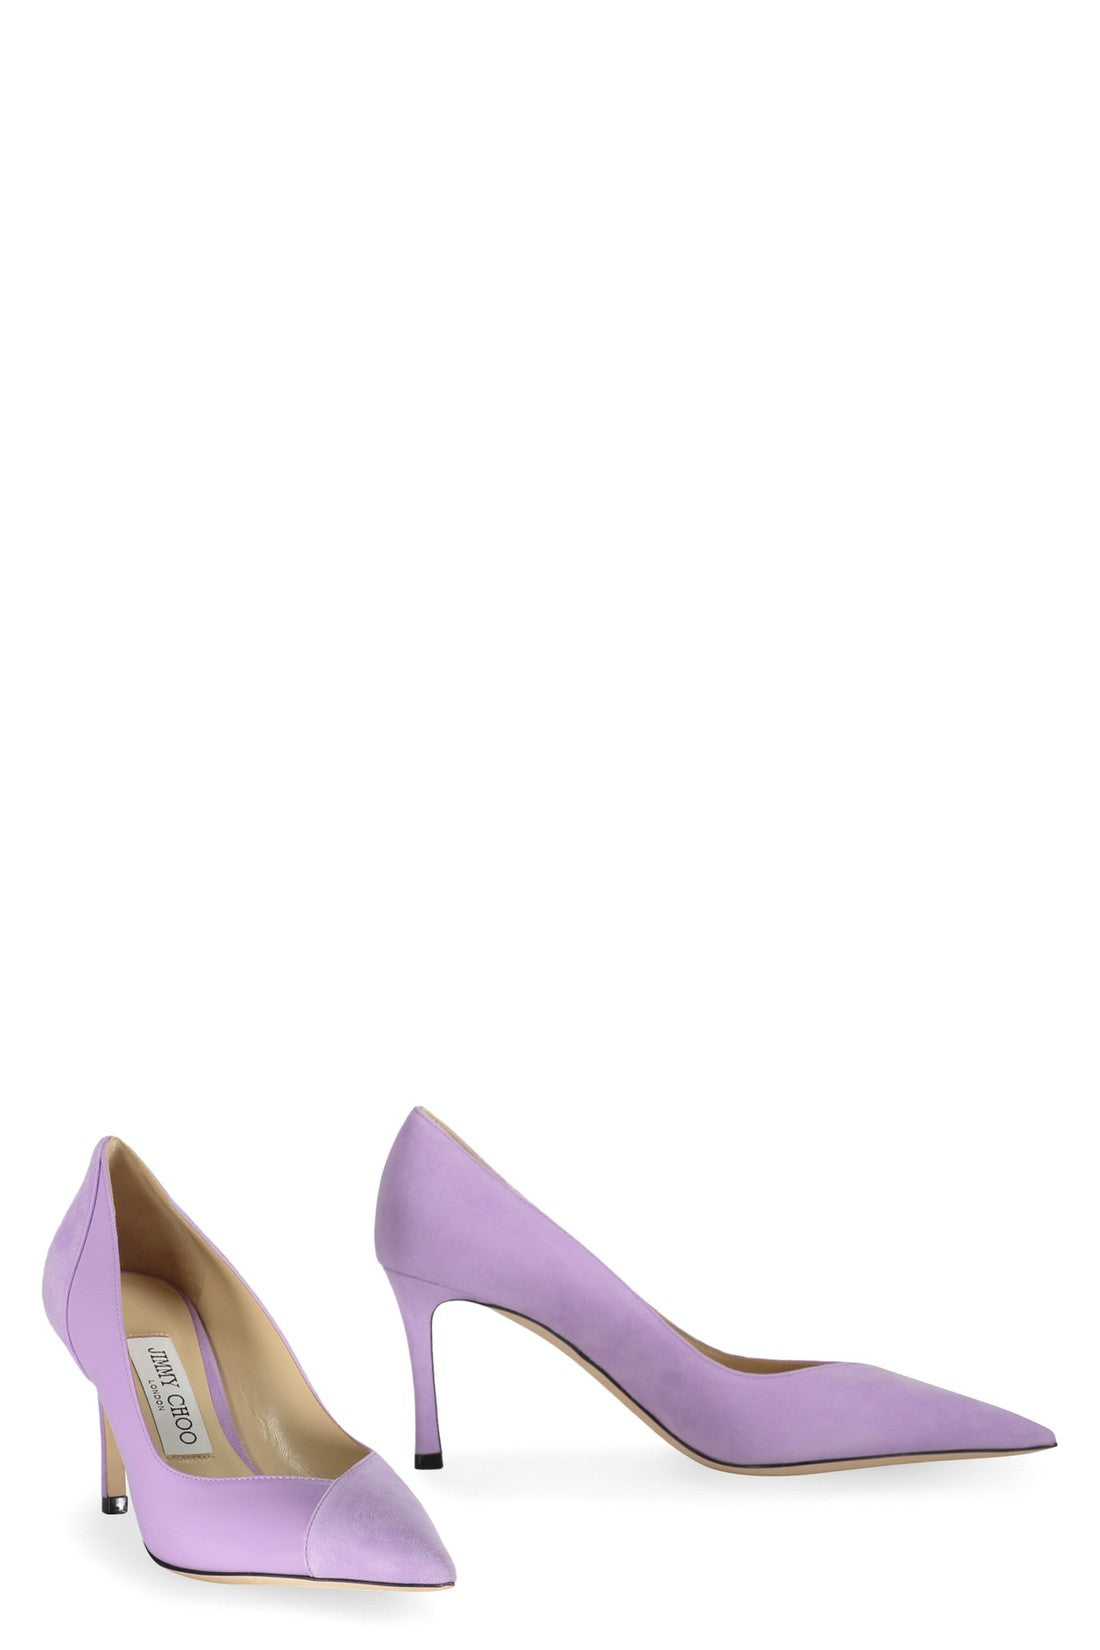 Pointy-toe pumps